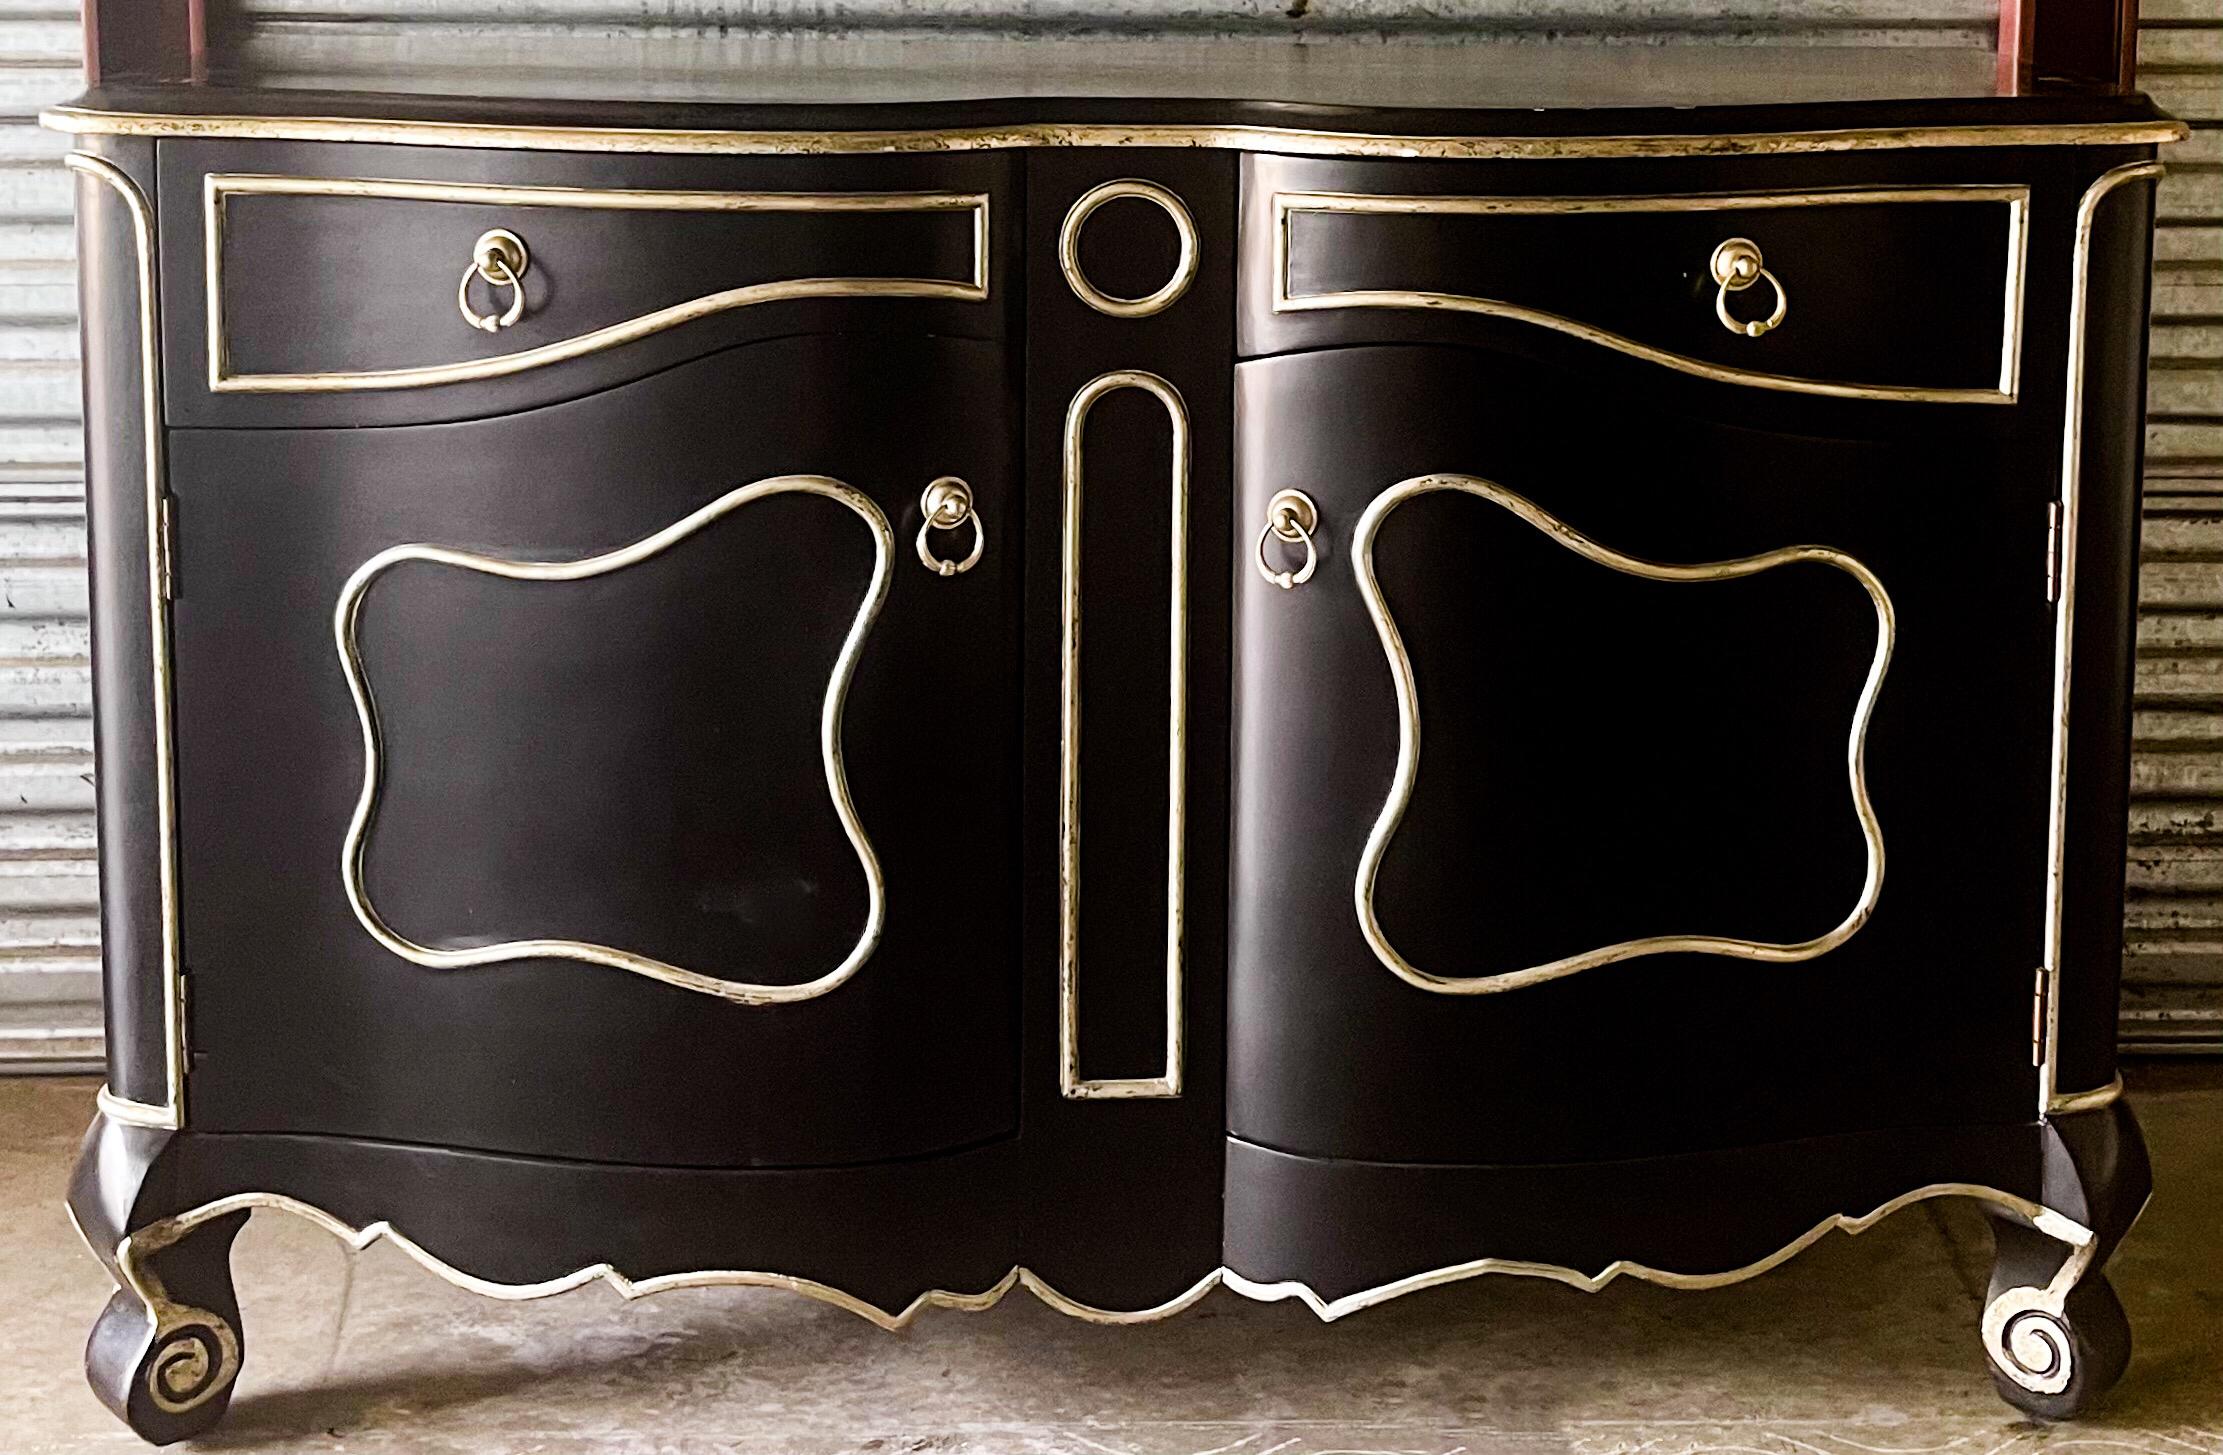 Late 20th-C. Modern French Louis XV Cabinet in Black and Silver Gilt, Pair For Sale 2